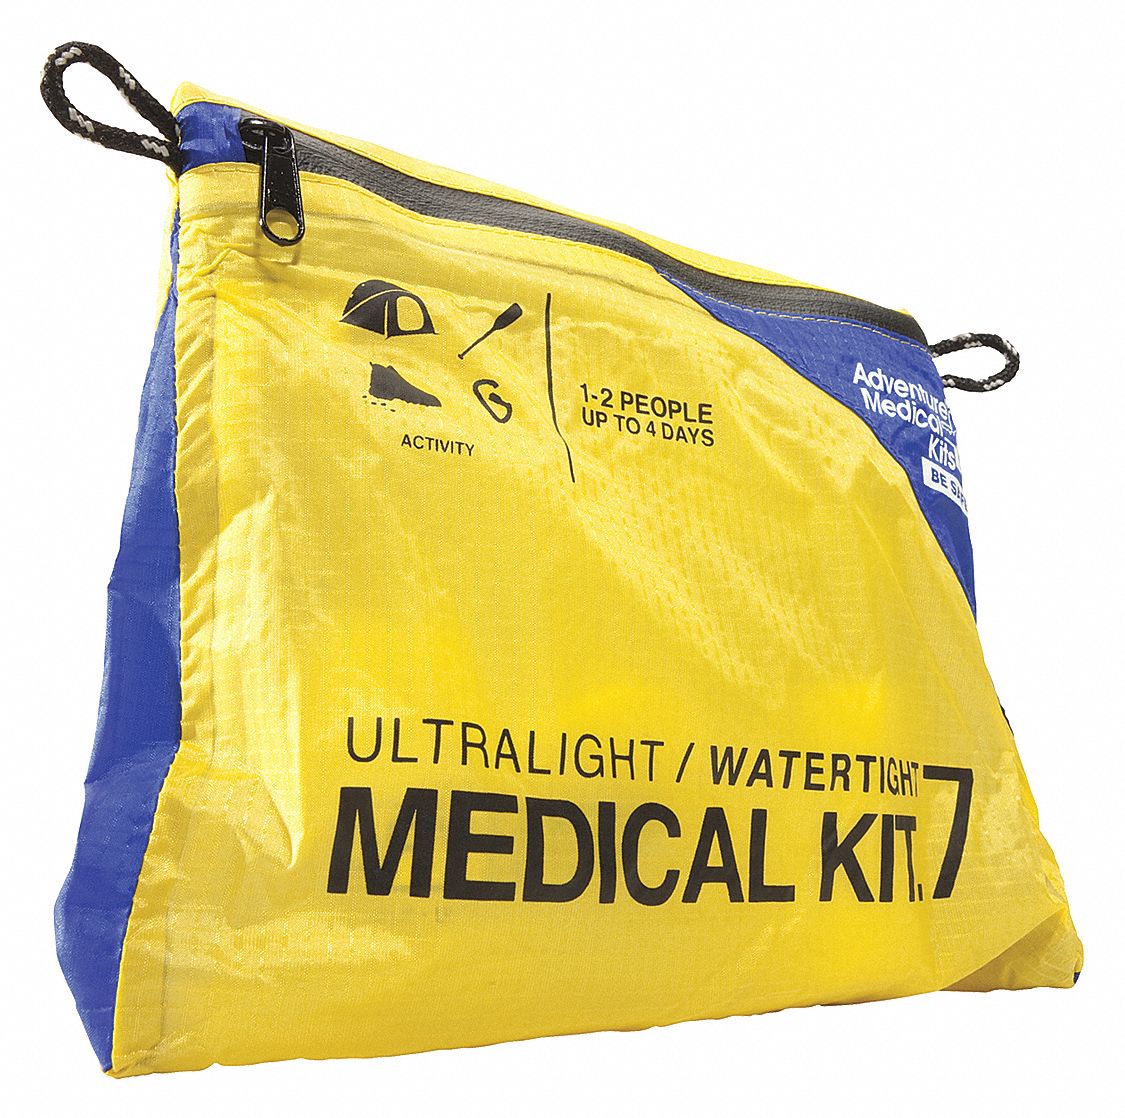 First Aid Kit: Industrial, 2 People Served per Kit, ANSI Std Not ANSI Compliant